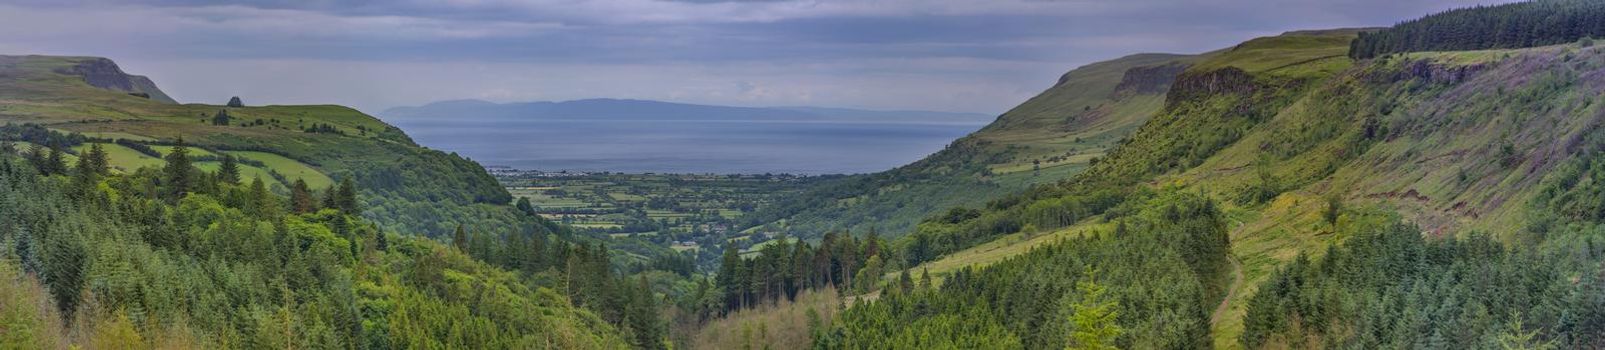 panoramic view on Glenariff known as Queens of the Glens and the biggest of the nine Glens of Antrim, County Antrim, Northern Ireland, UK